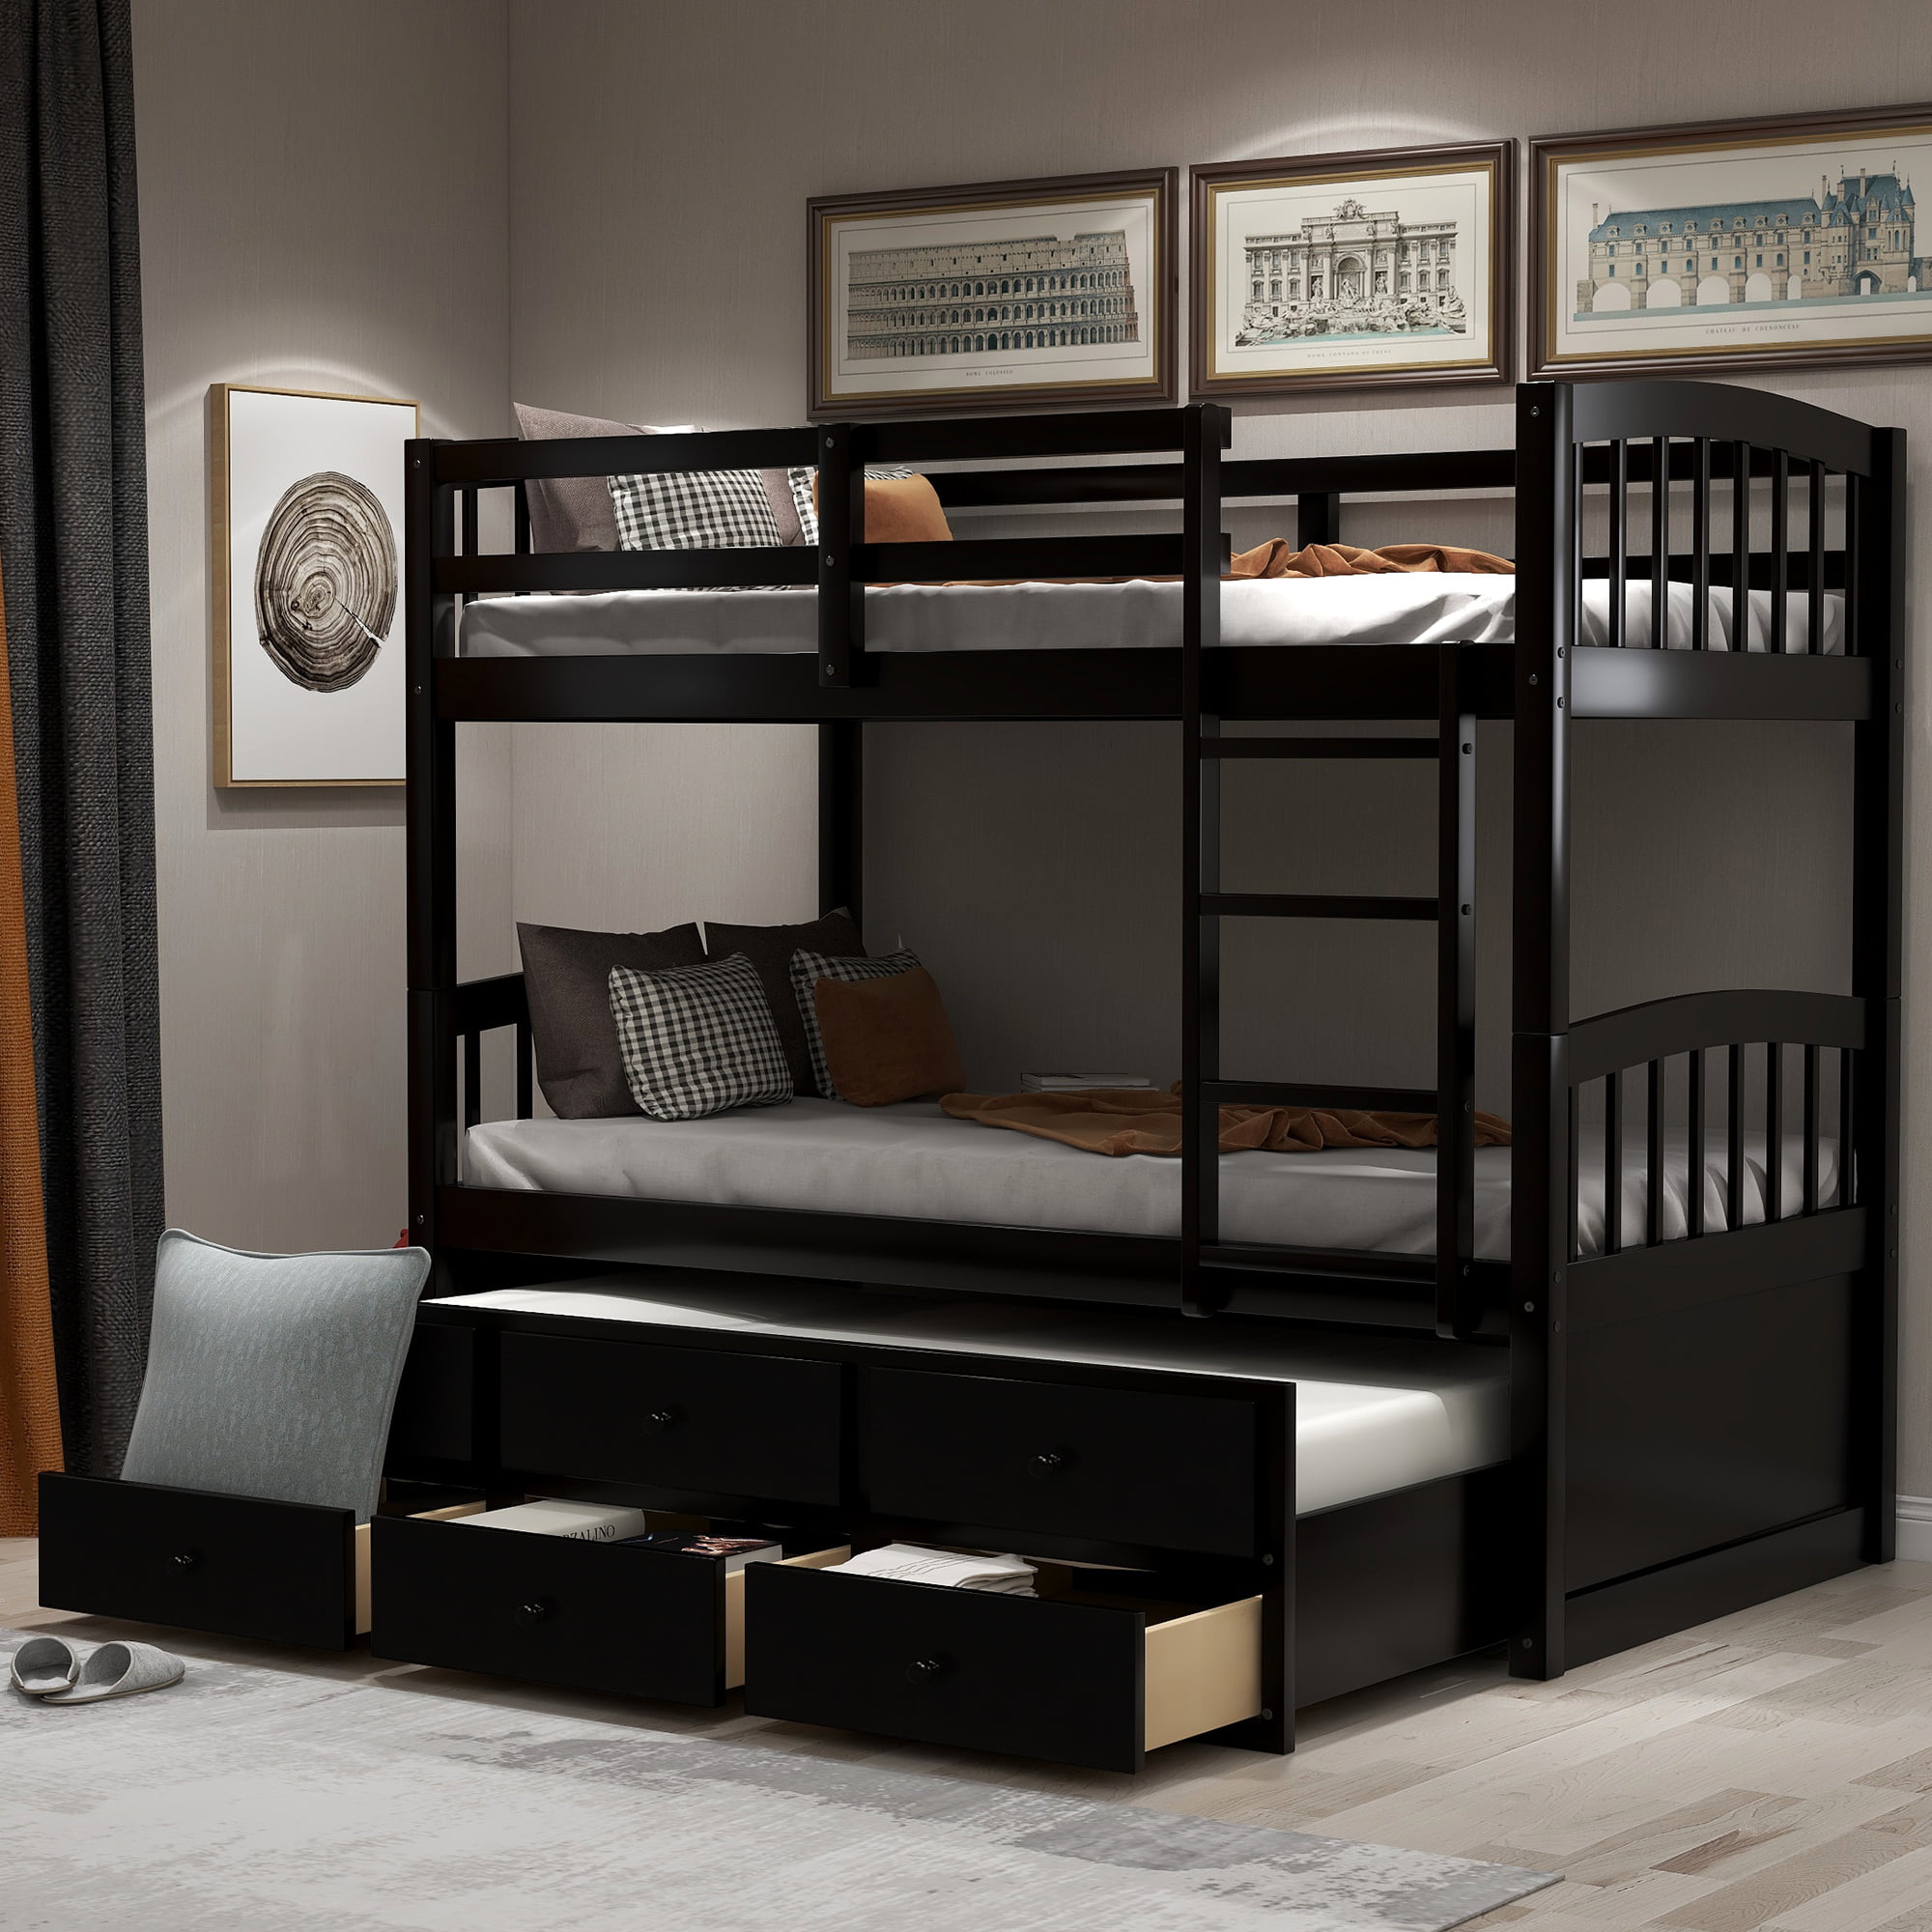 Urhomepro Twin Over Bunk Beds, Bunk Bed With Trundle Solid Wood